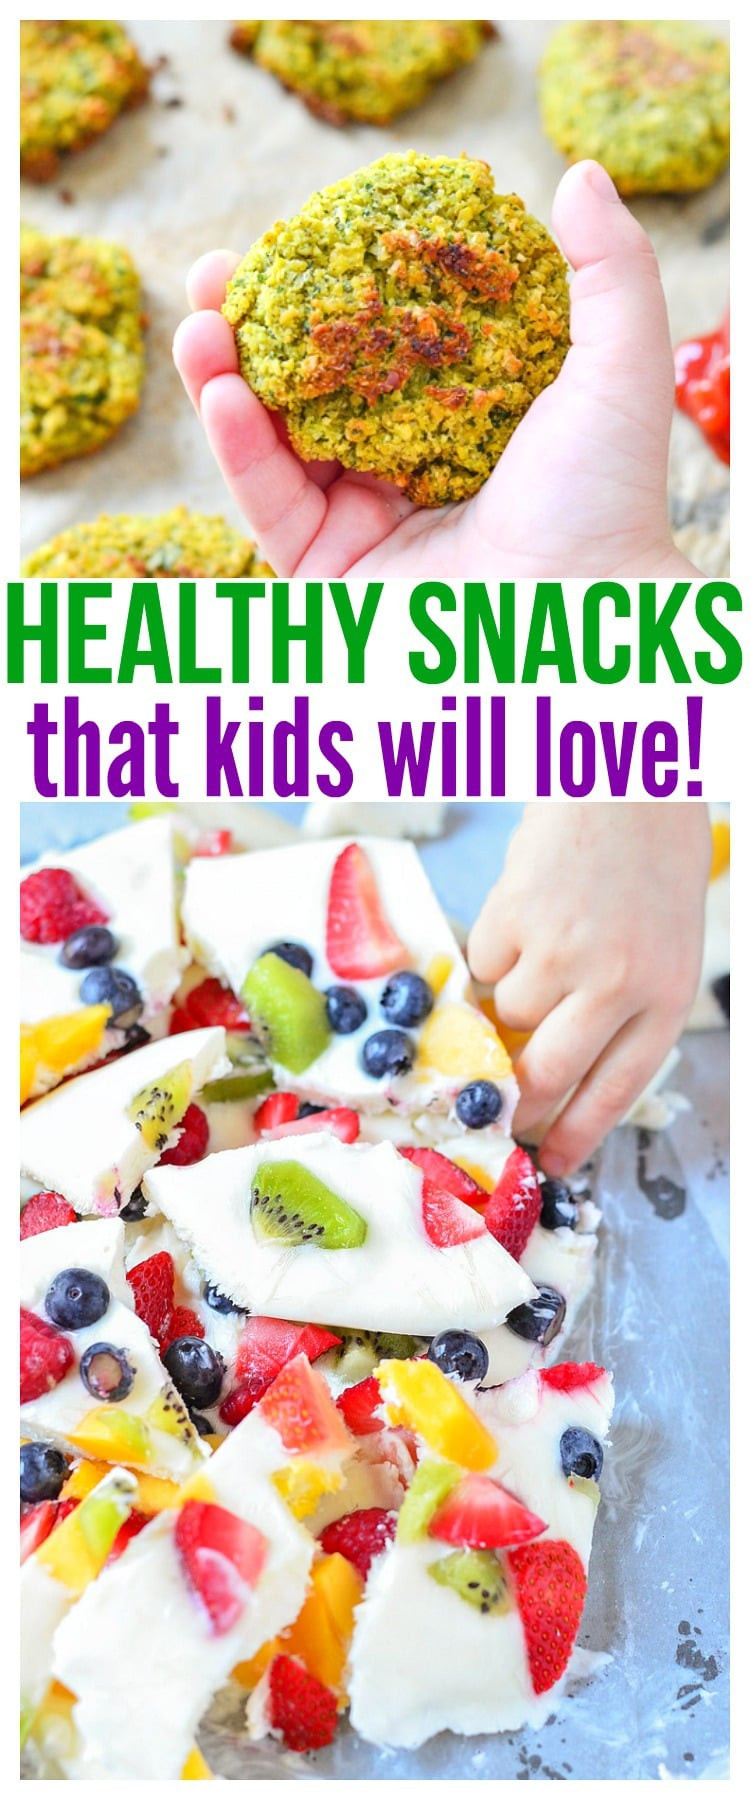 Healthy Kid Friendly Snacks
 Healthy Snacks for Kids Courtney s Sweets